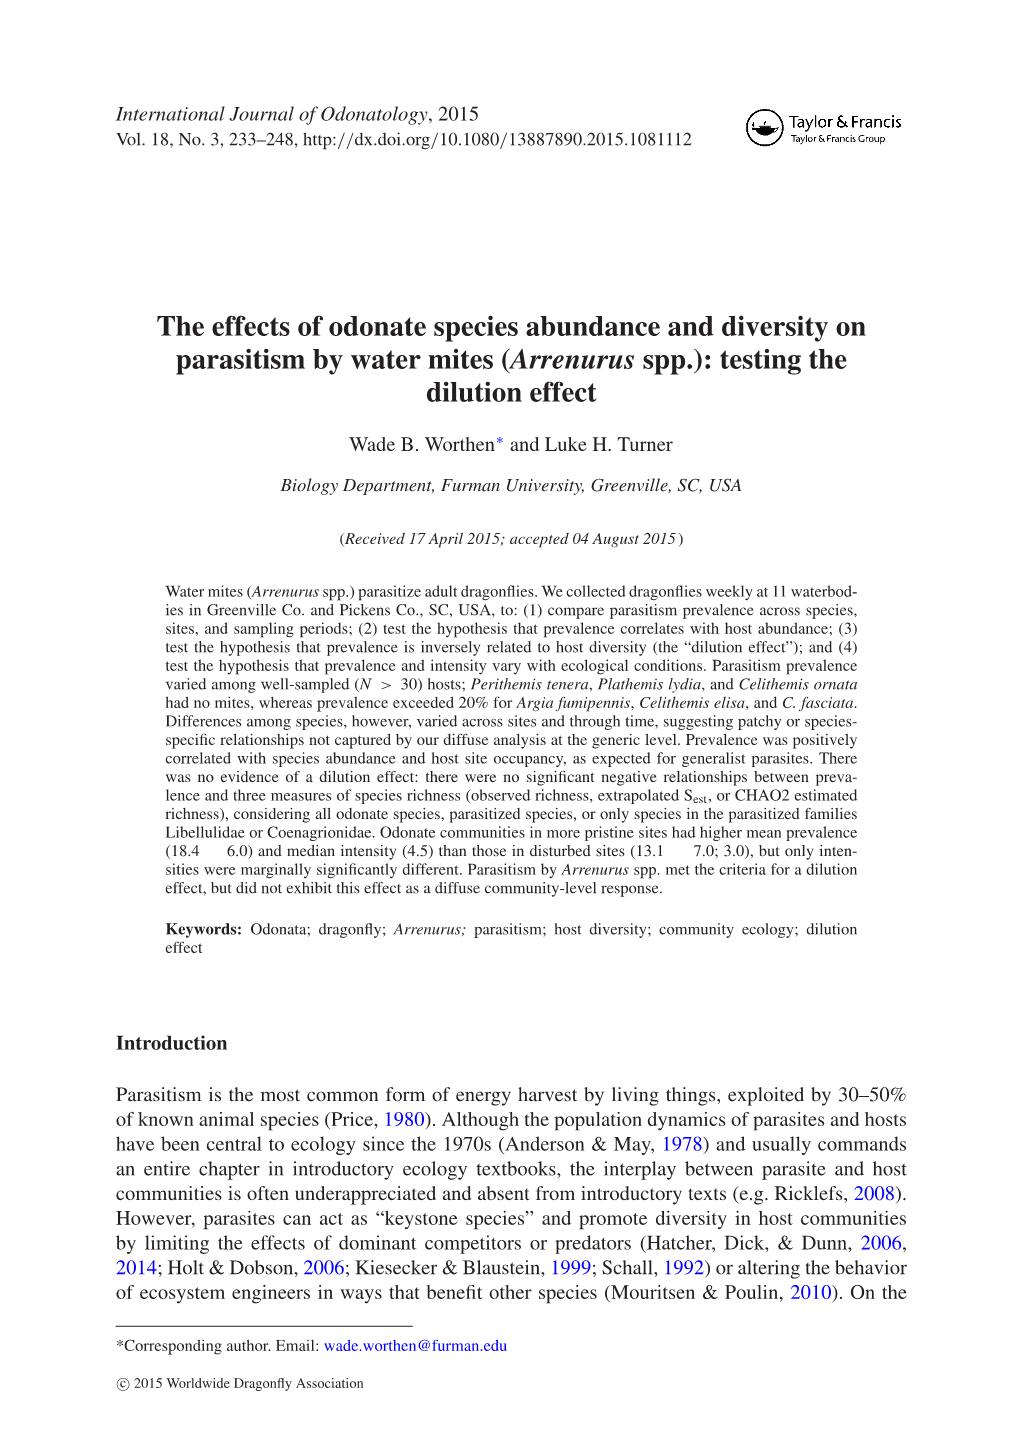 The Effects of Odonate Species Abundance and Diversity on Parasitism by Water Mites (Arrenurus Spp.): Testing the Dilution Effect